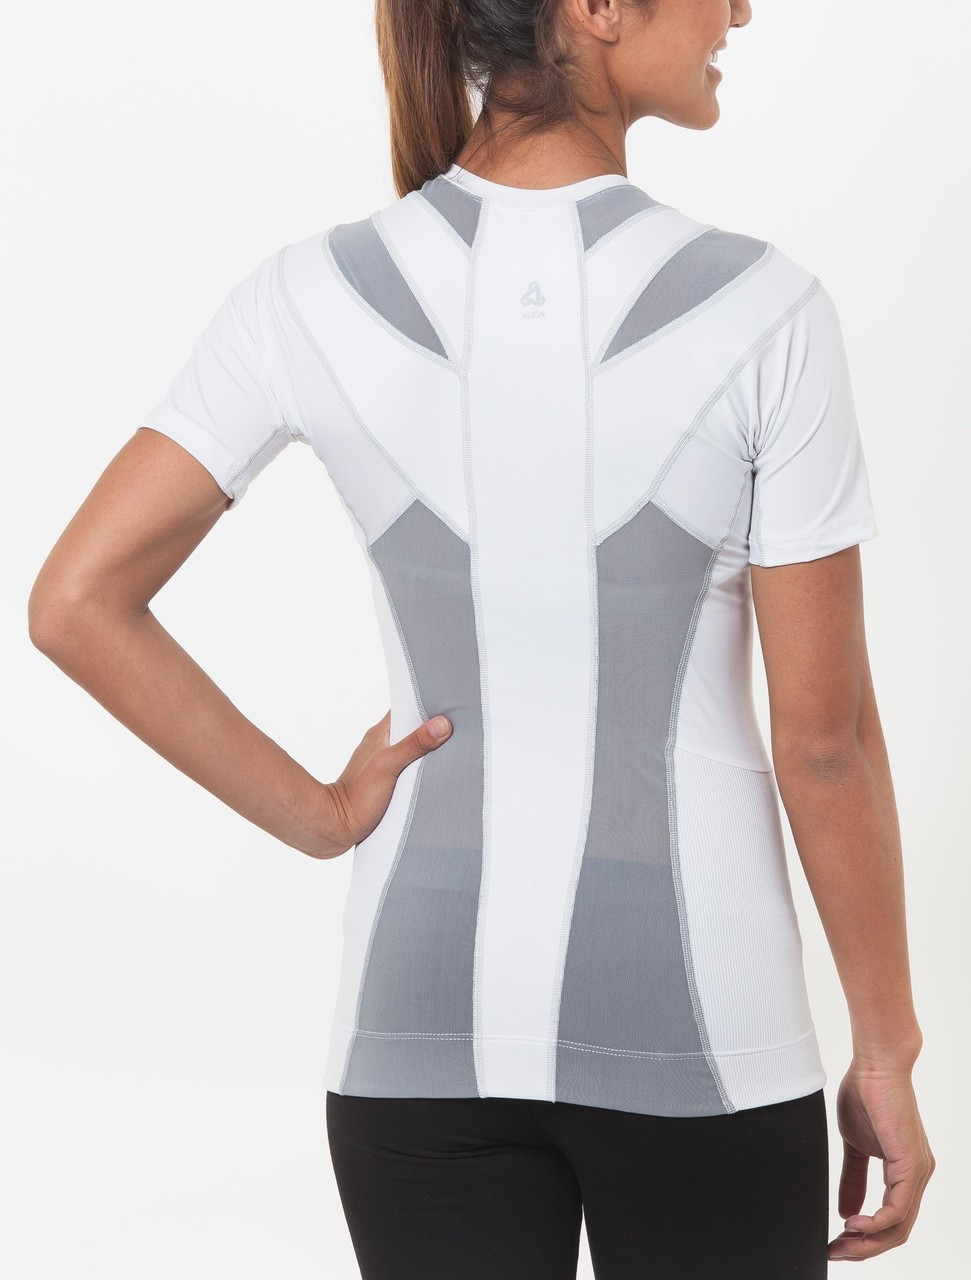 The Posture Shirt® 2.0 Pullover Women [354W] - $95.00 : PT United